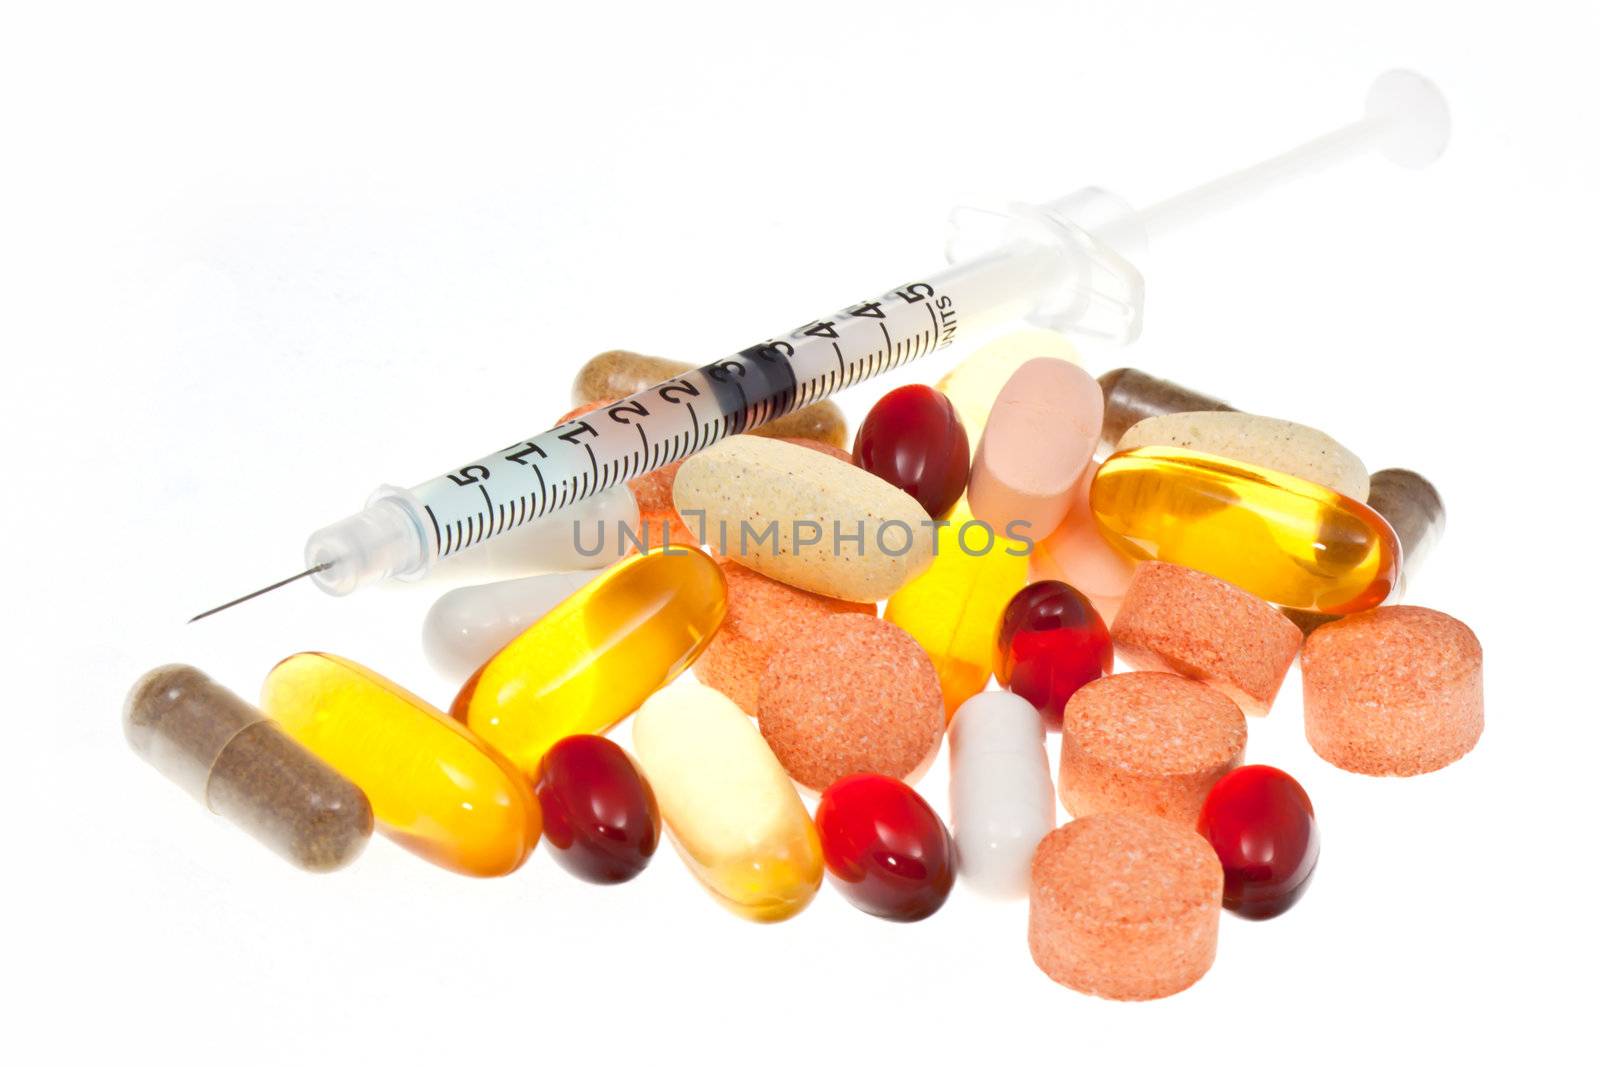 Syringe with Supplements by melpomene